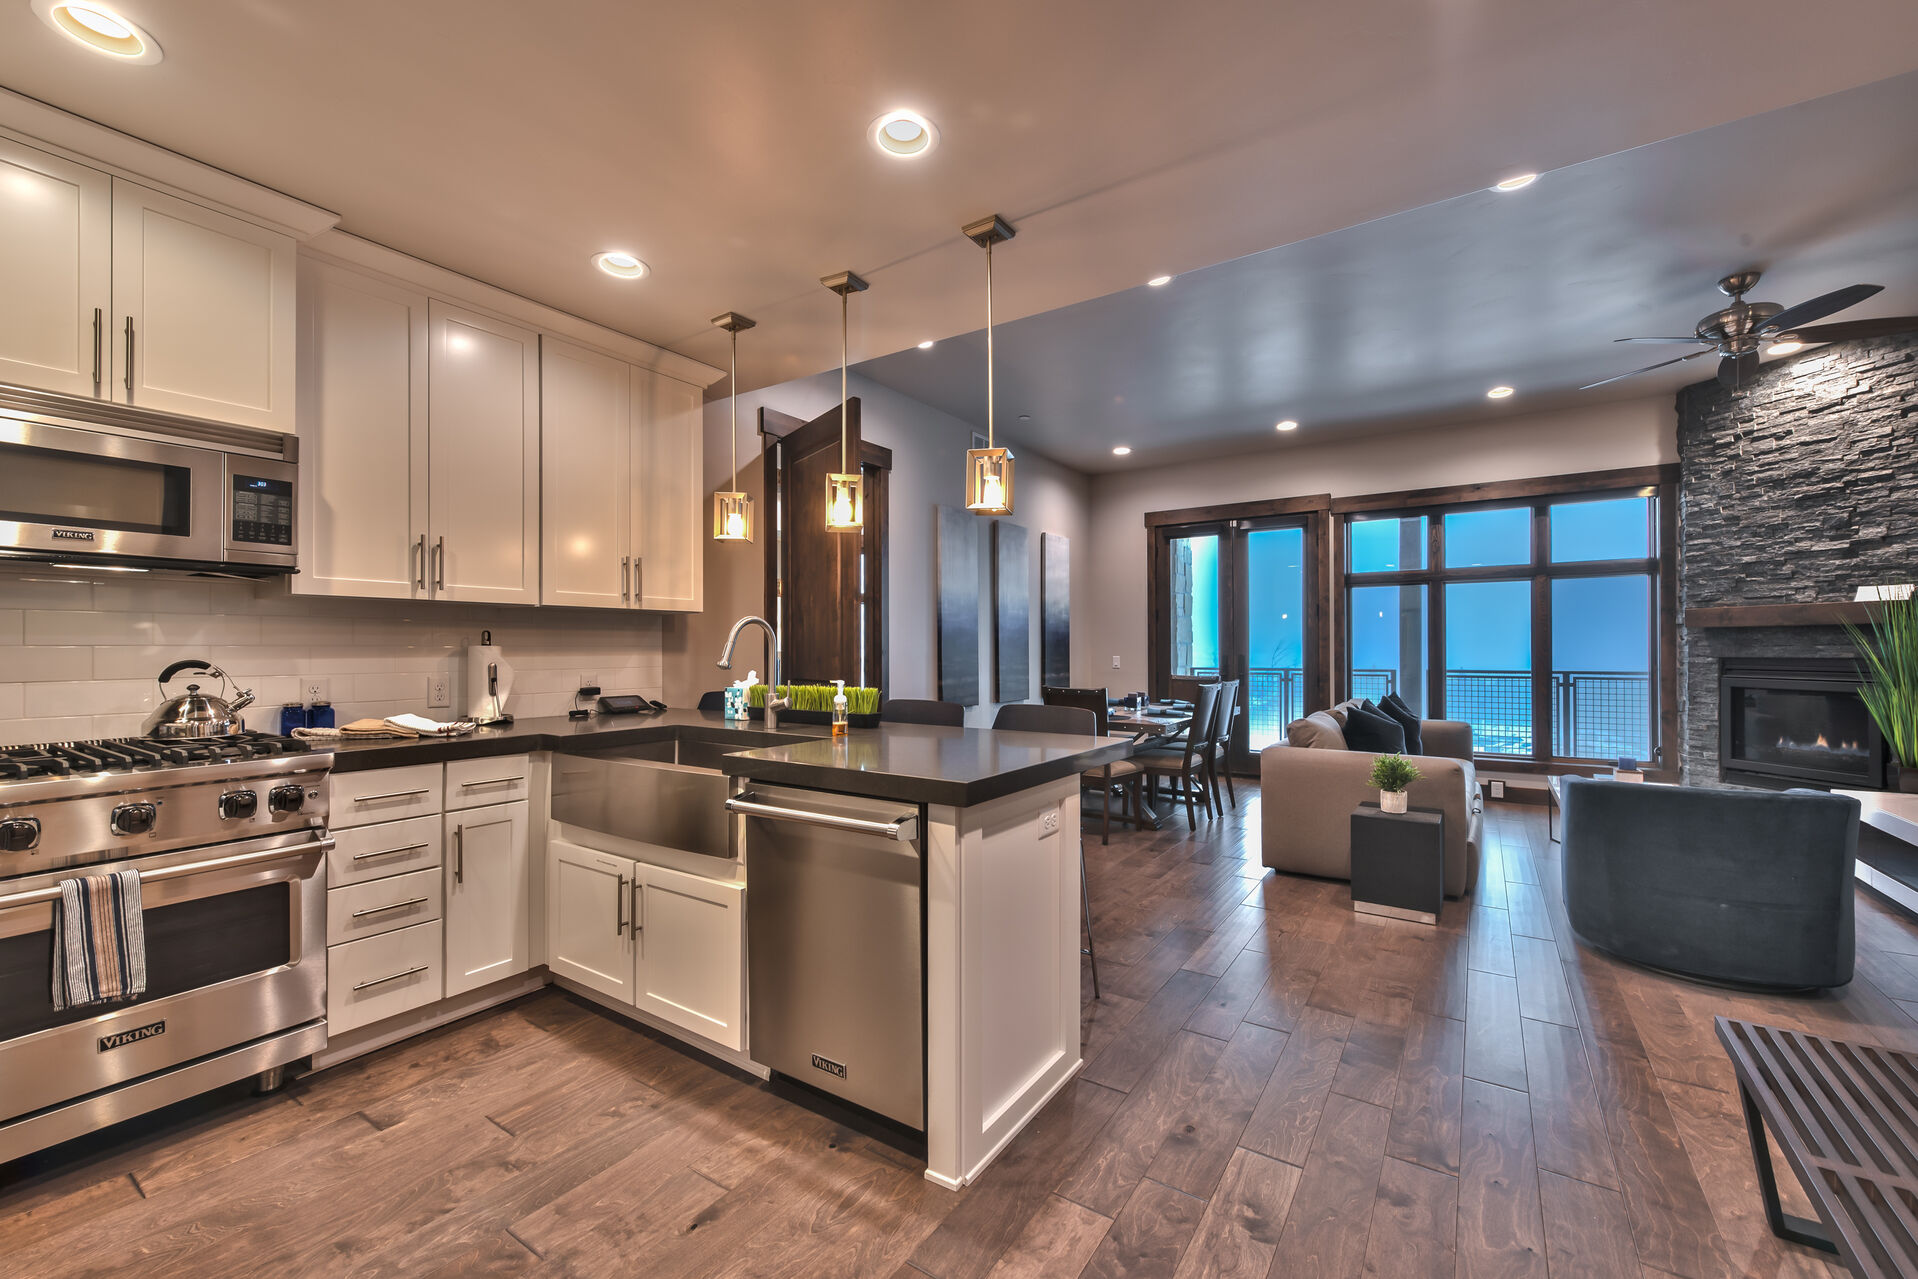 The Kitchen and Living Area with a Fireplace of Our Vacation Rentals in Park City, Utah.